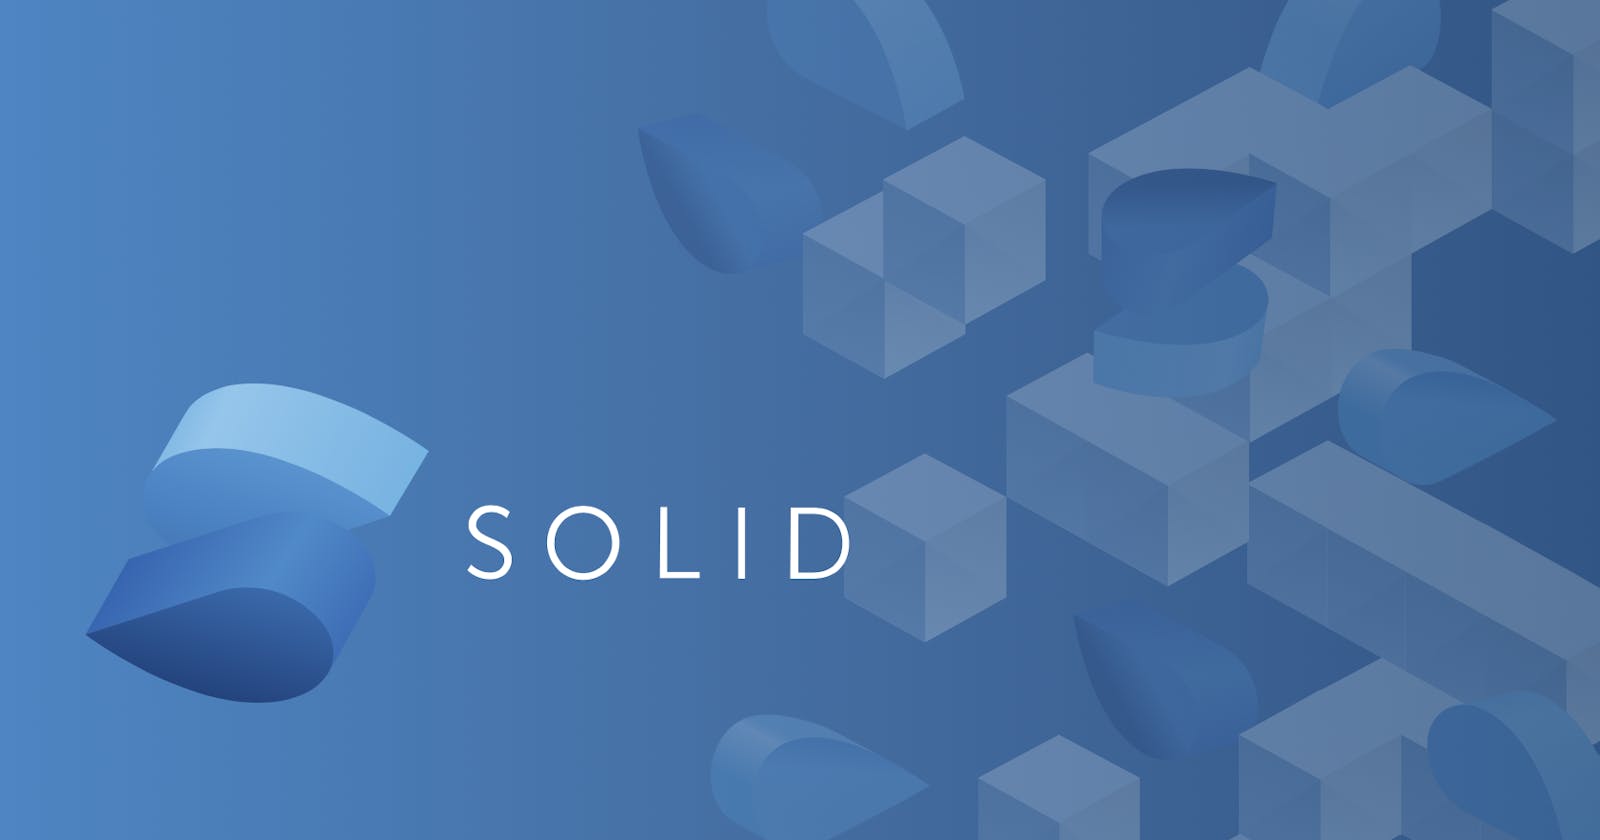 My experience with SolidJS